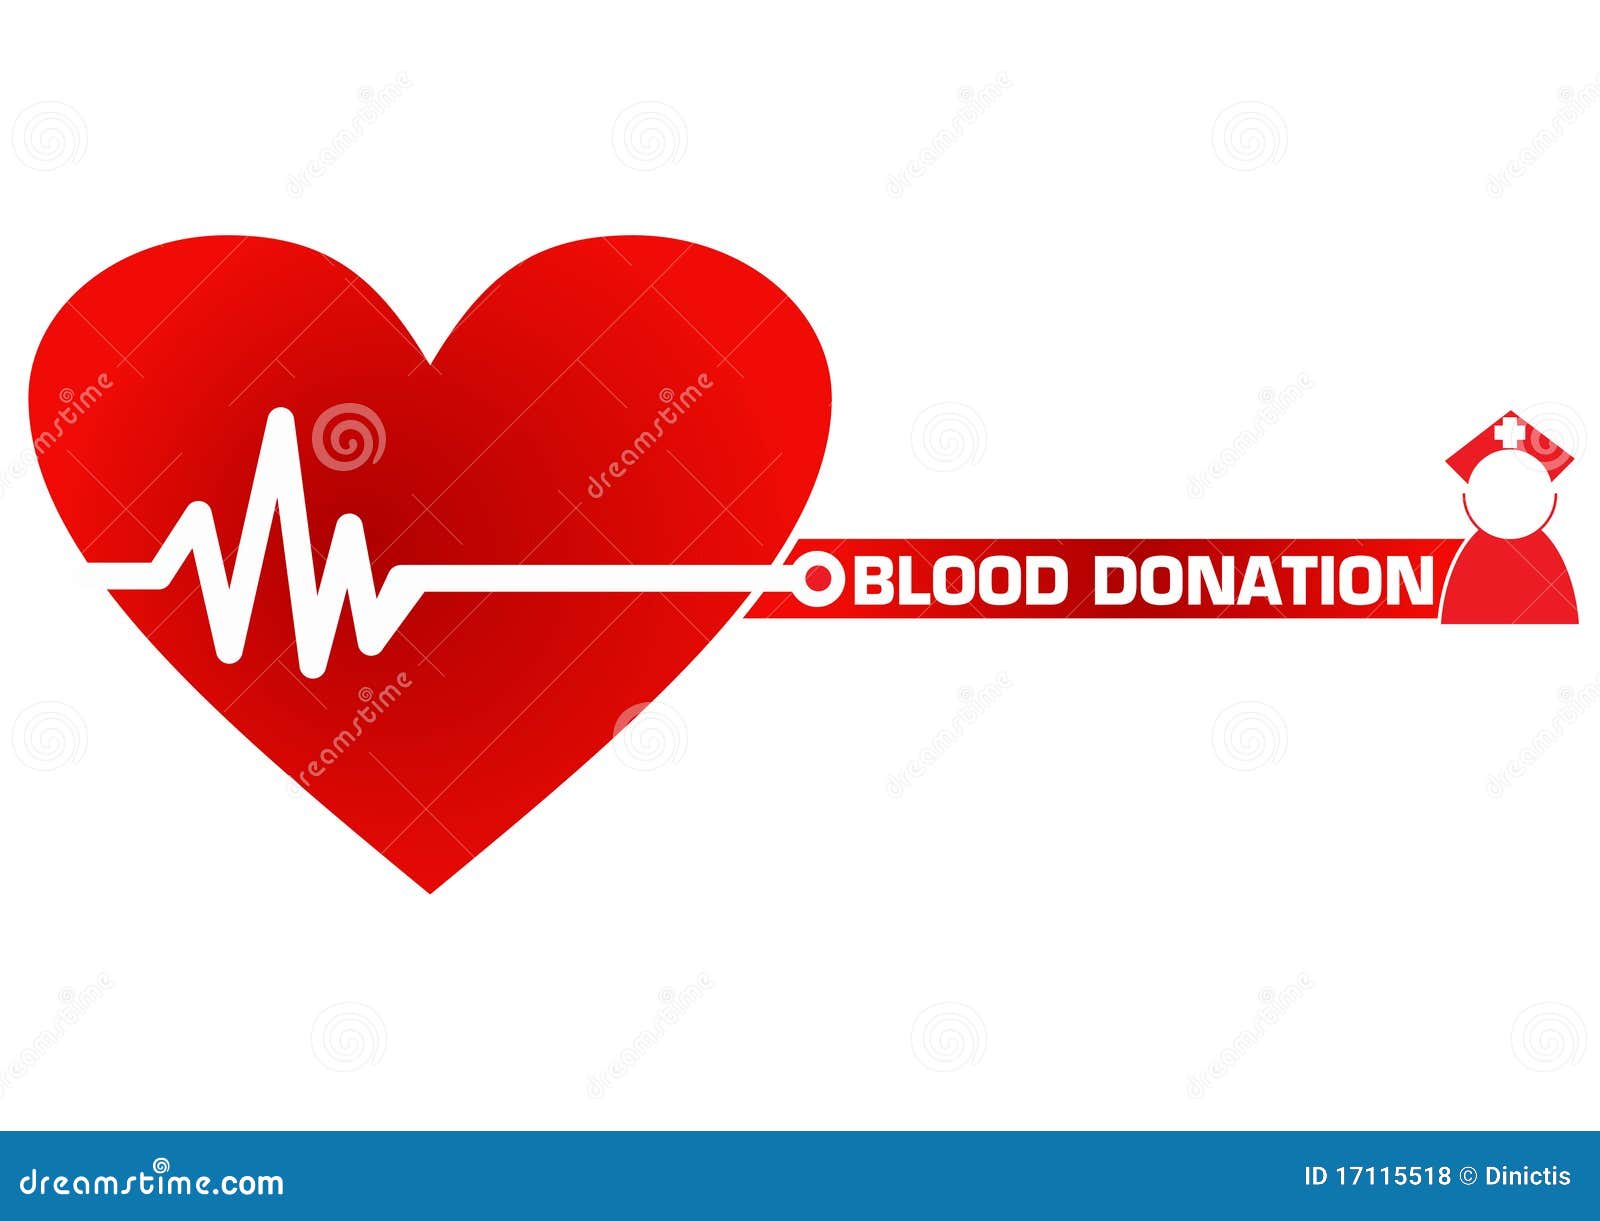 clipart of blood donation - photo #22